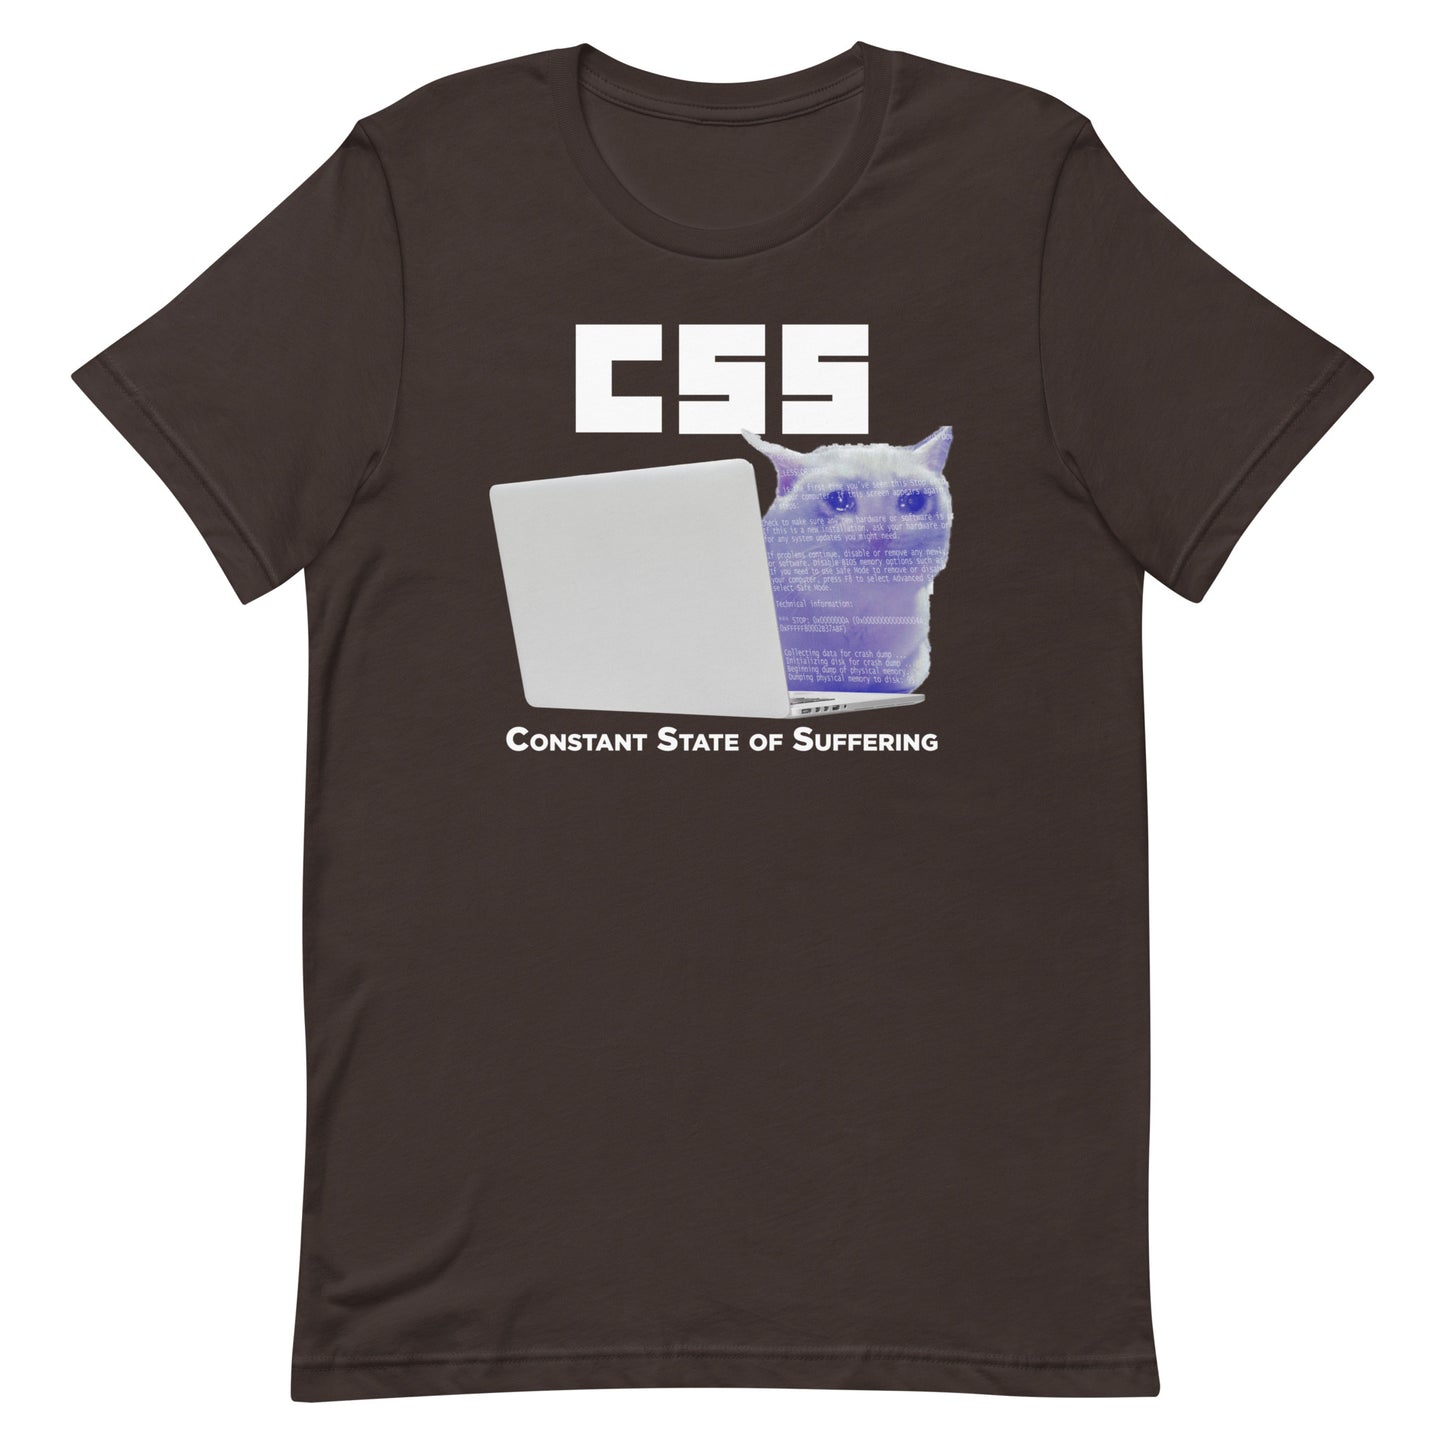 CSS (Constant State of Suffering) Unisex t-shirt